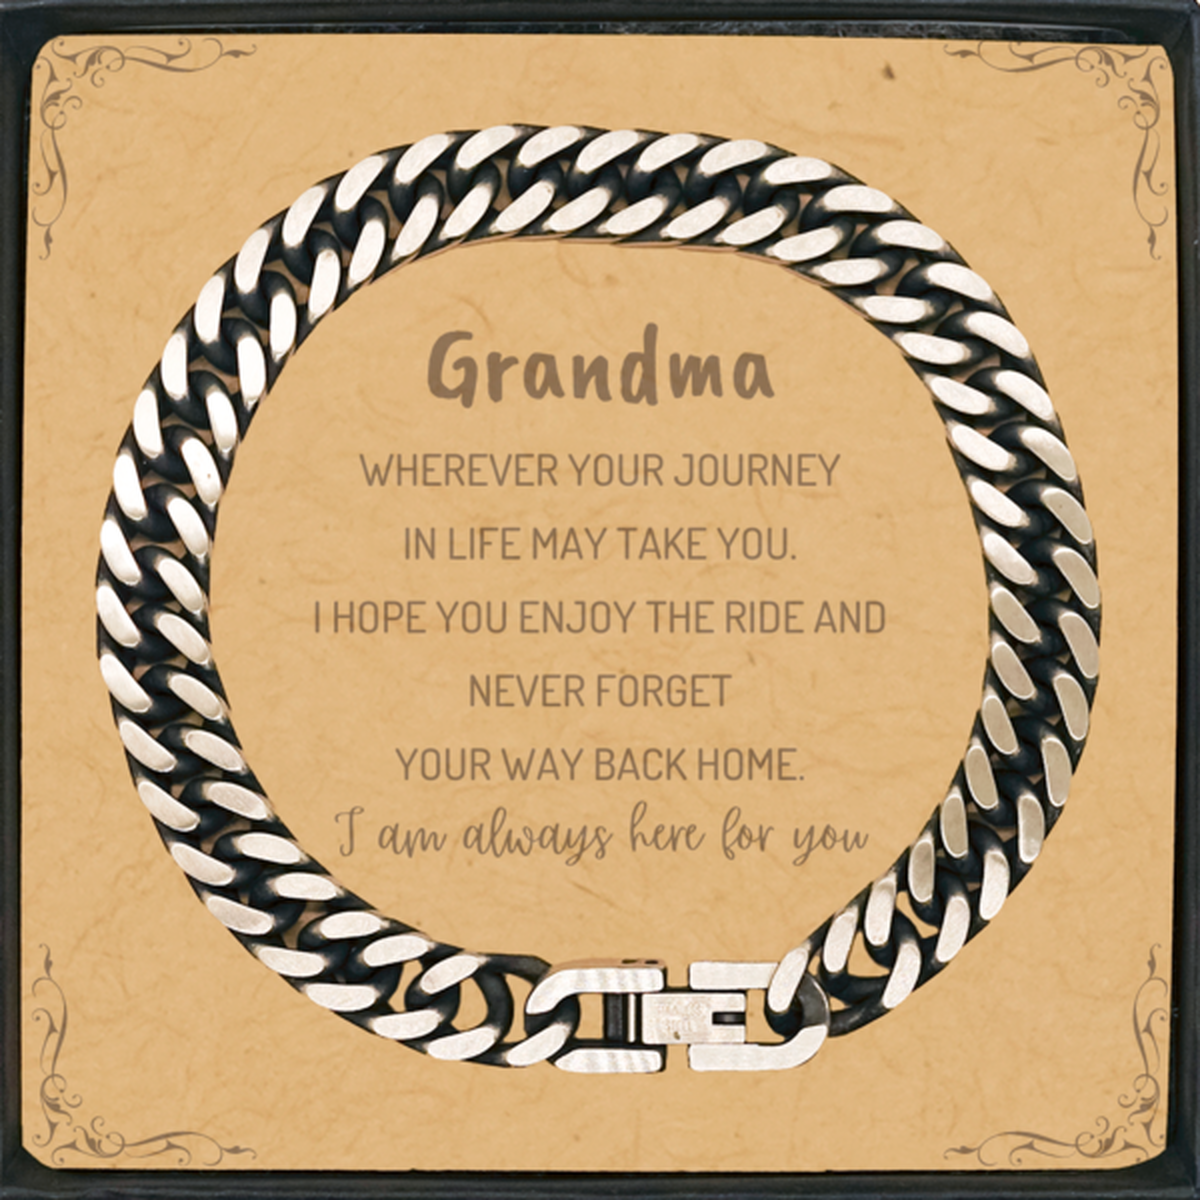 Grandma wherever your journey in life may take you, I am always here for you Grandma Cuban Link Chain Bracelet, Awesome Christmas Gifts For Grandma Message Card, Grandma Birthday Gifts for Men Women Family Loved One